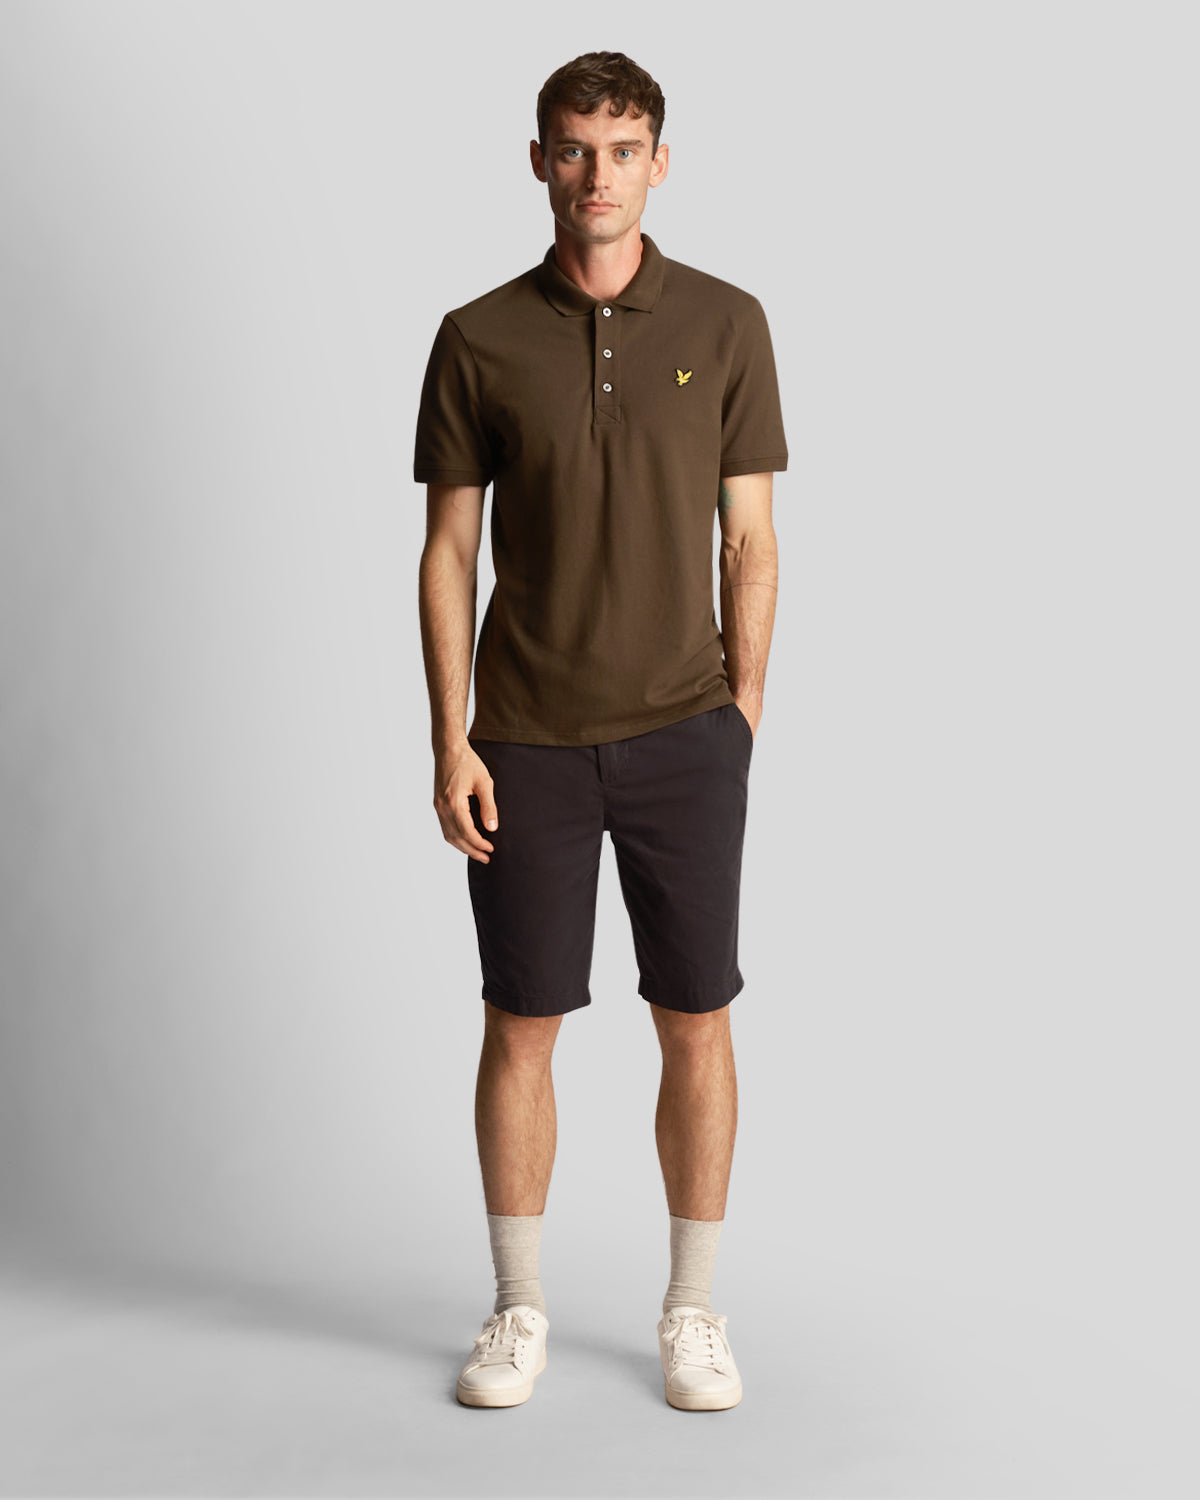 Lyle & Scott Mens Anfield Chino Short in Black - 36 product